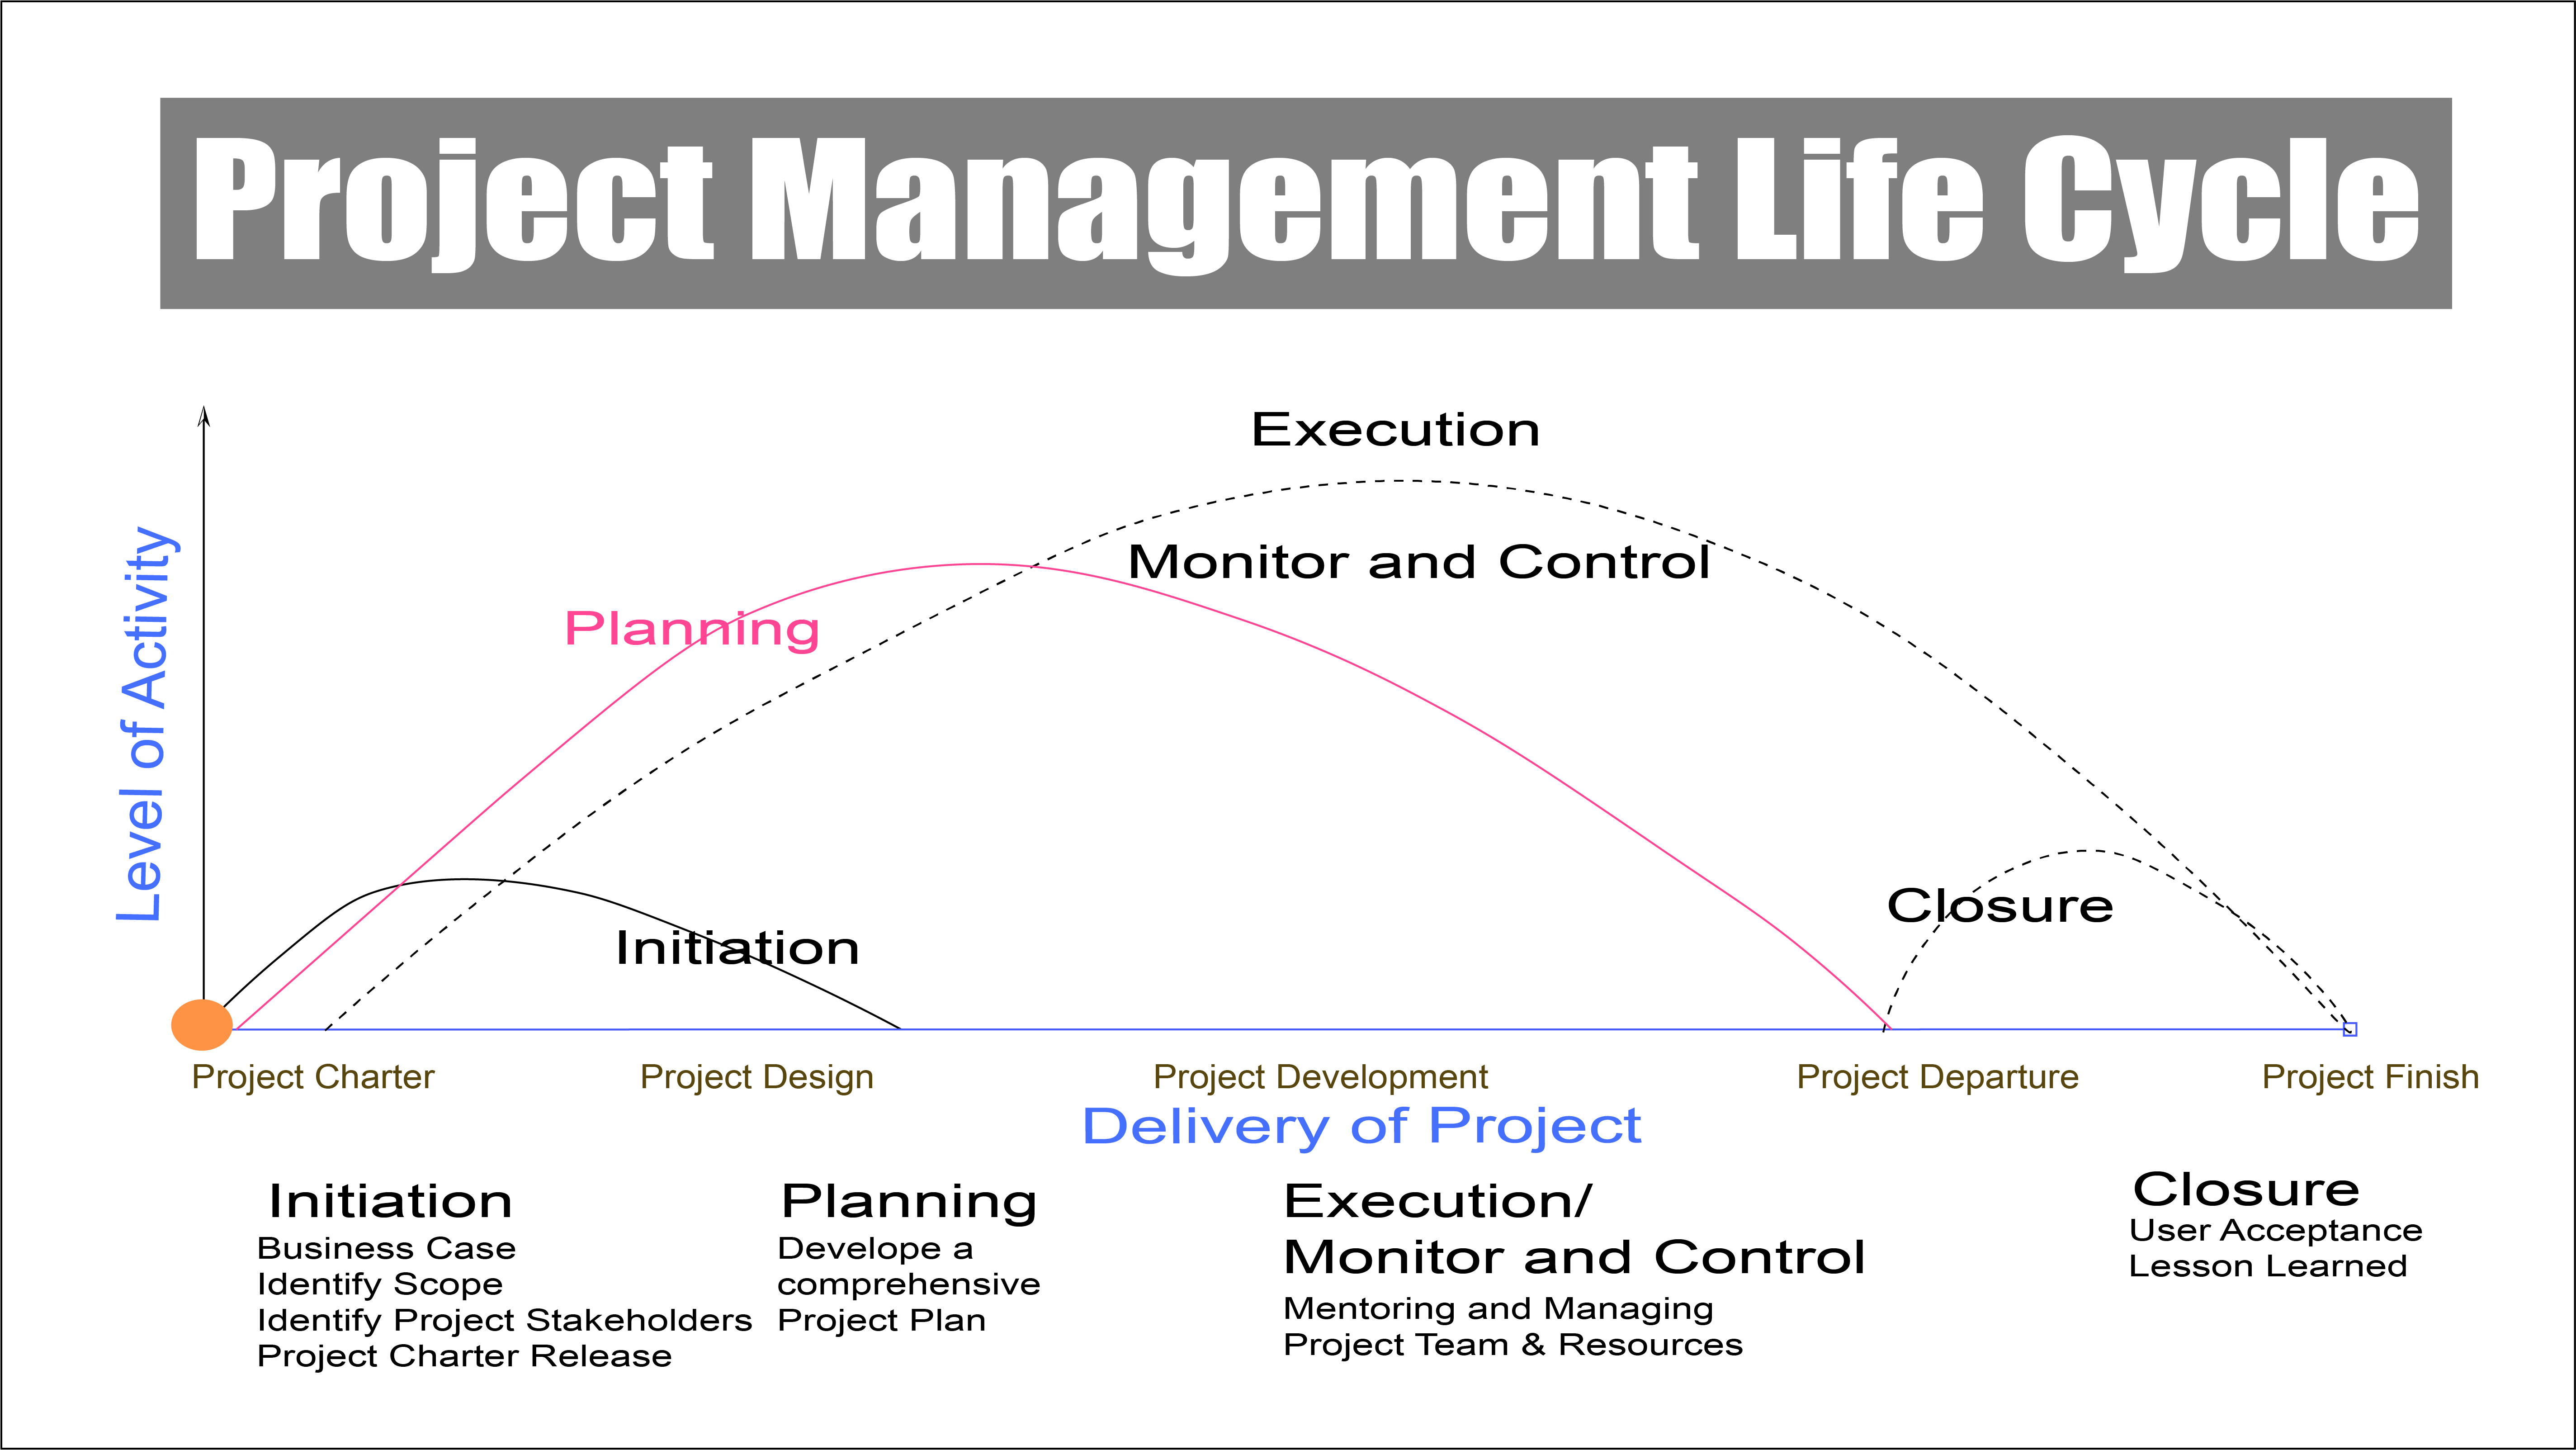 Project Management Life Cycle.